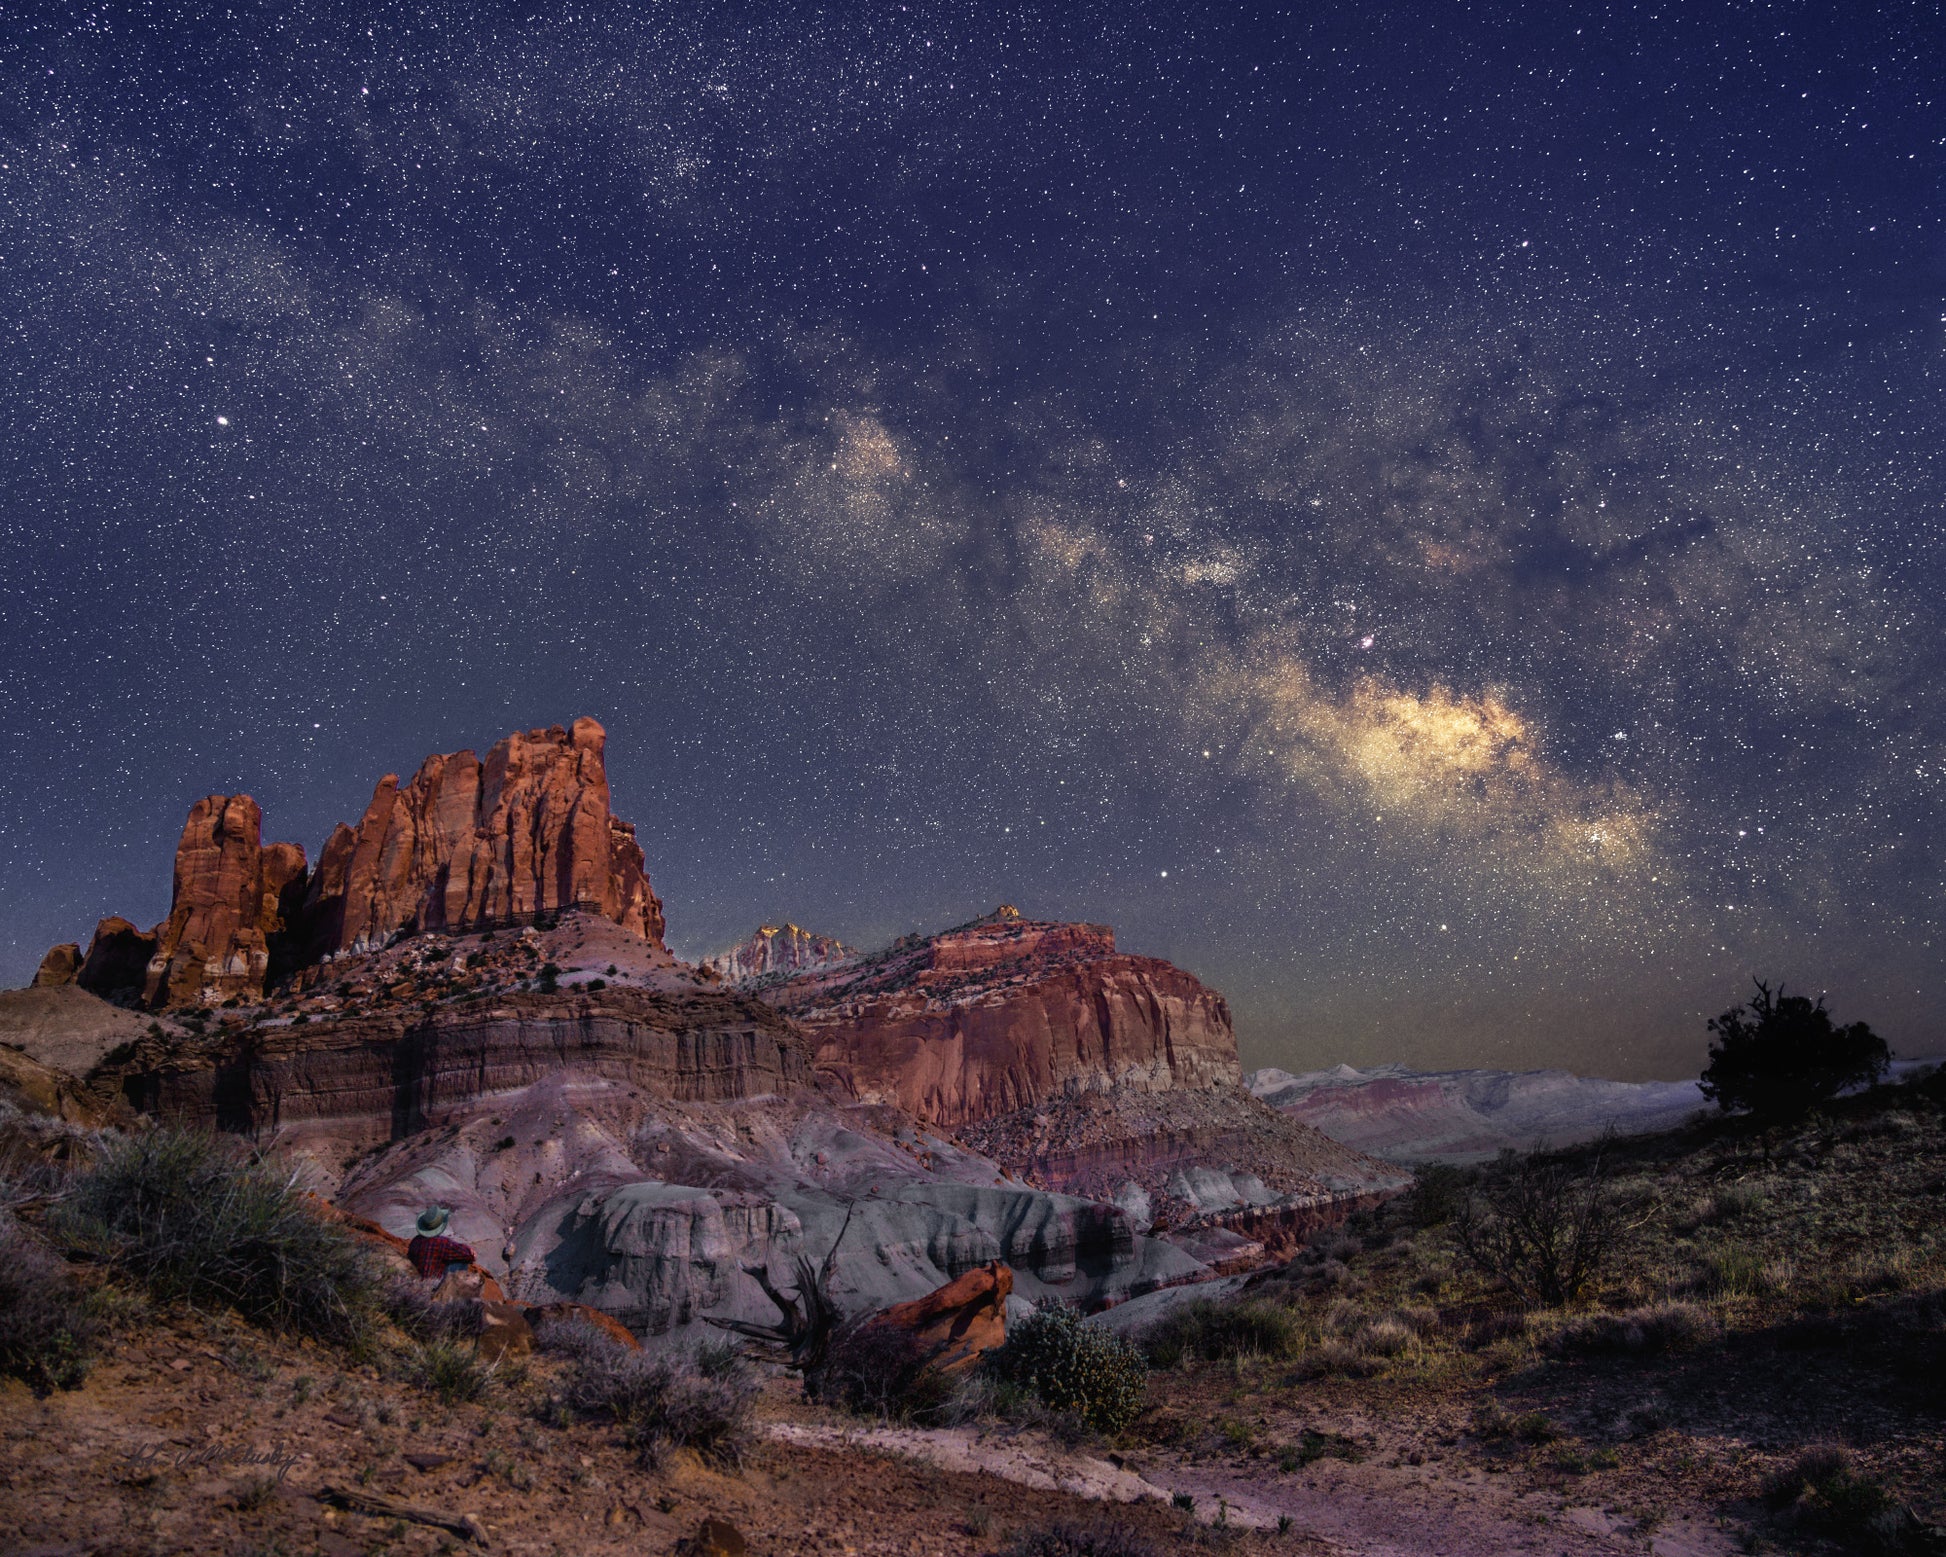 The moon lights the cliffs of Capitol Reef National Park while the Milky Way glows in the night sky in this landscape photography print from the Chimney Rock Trail.